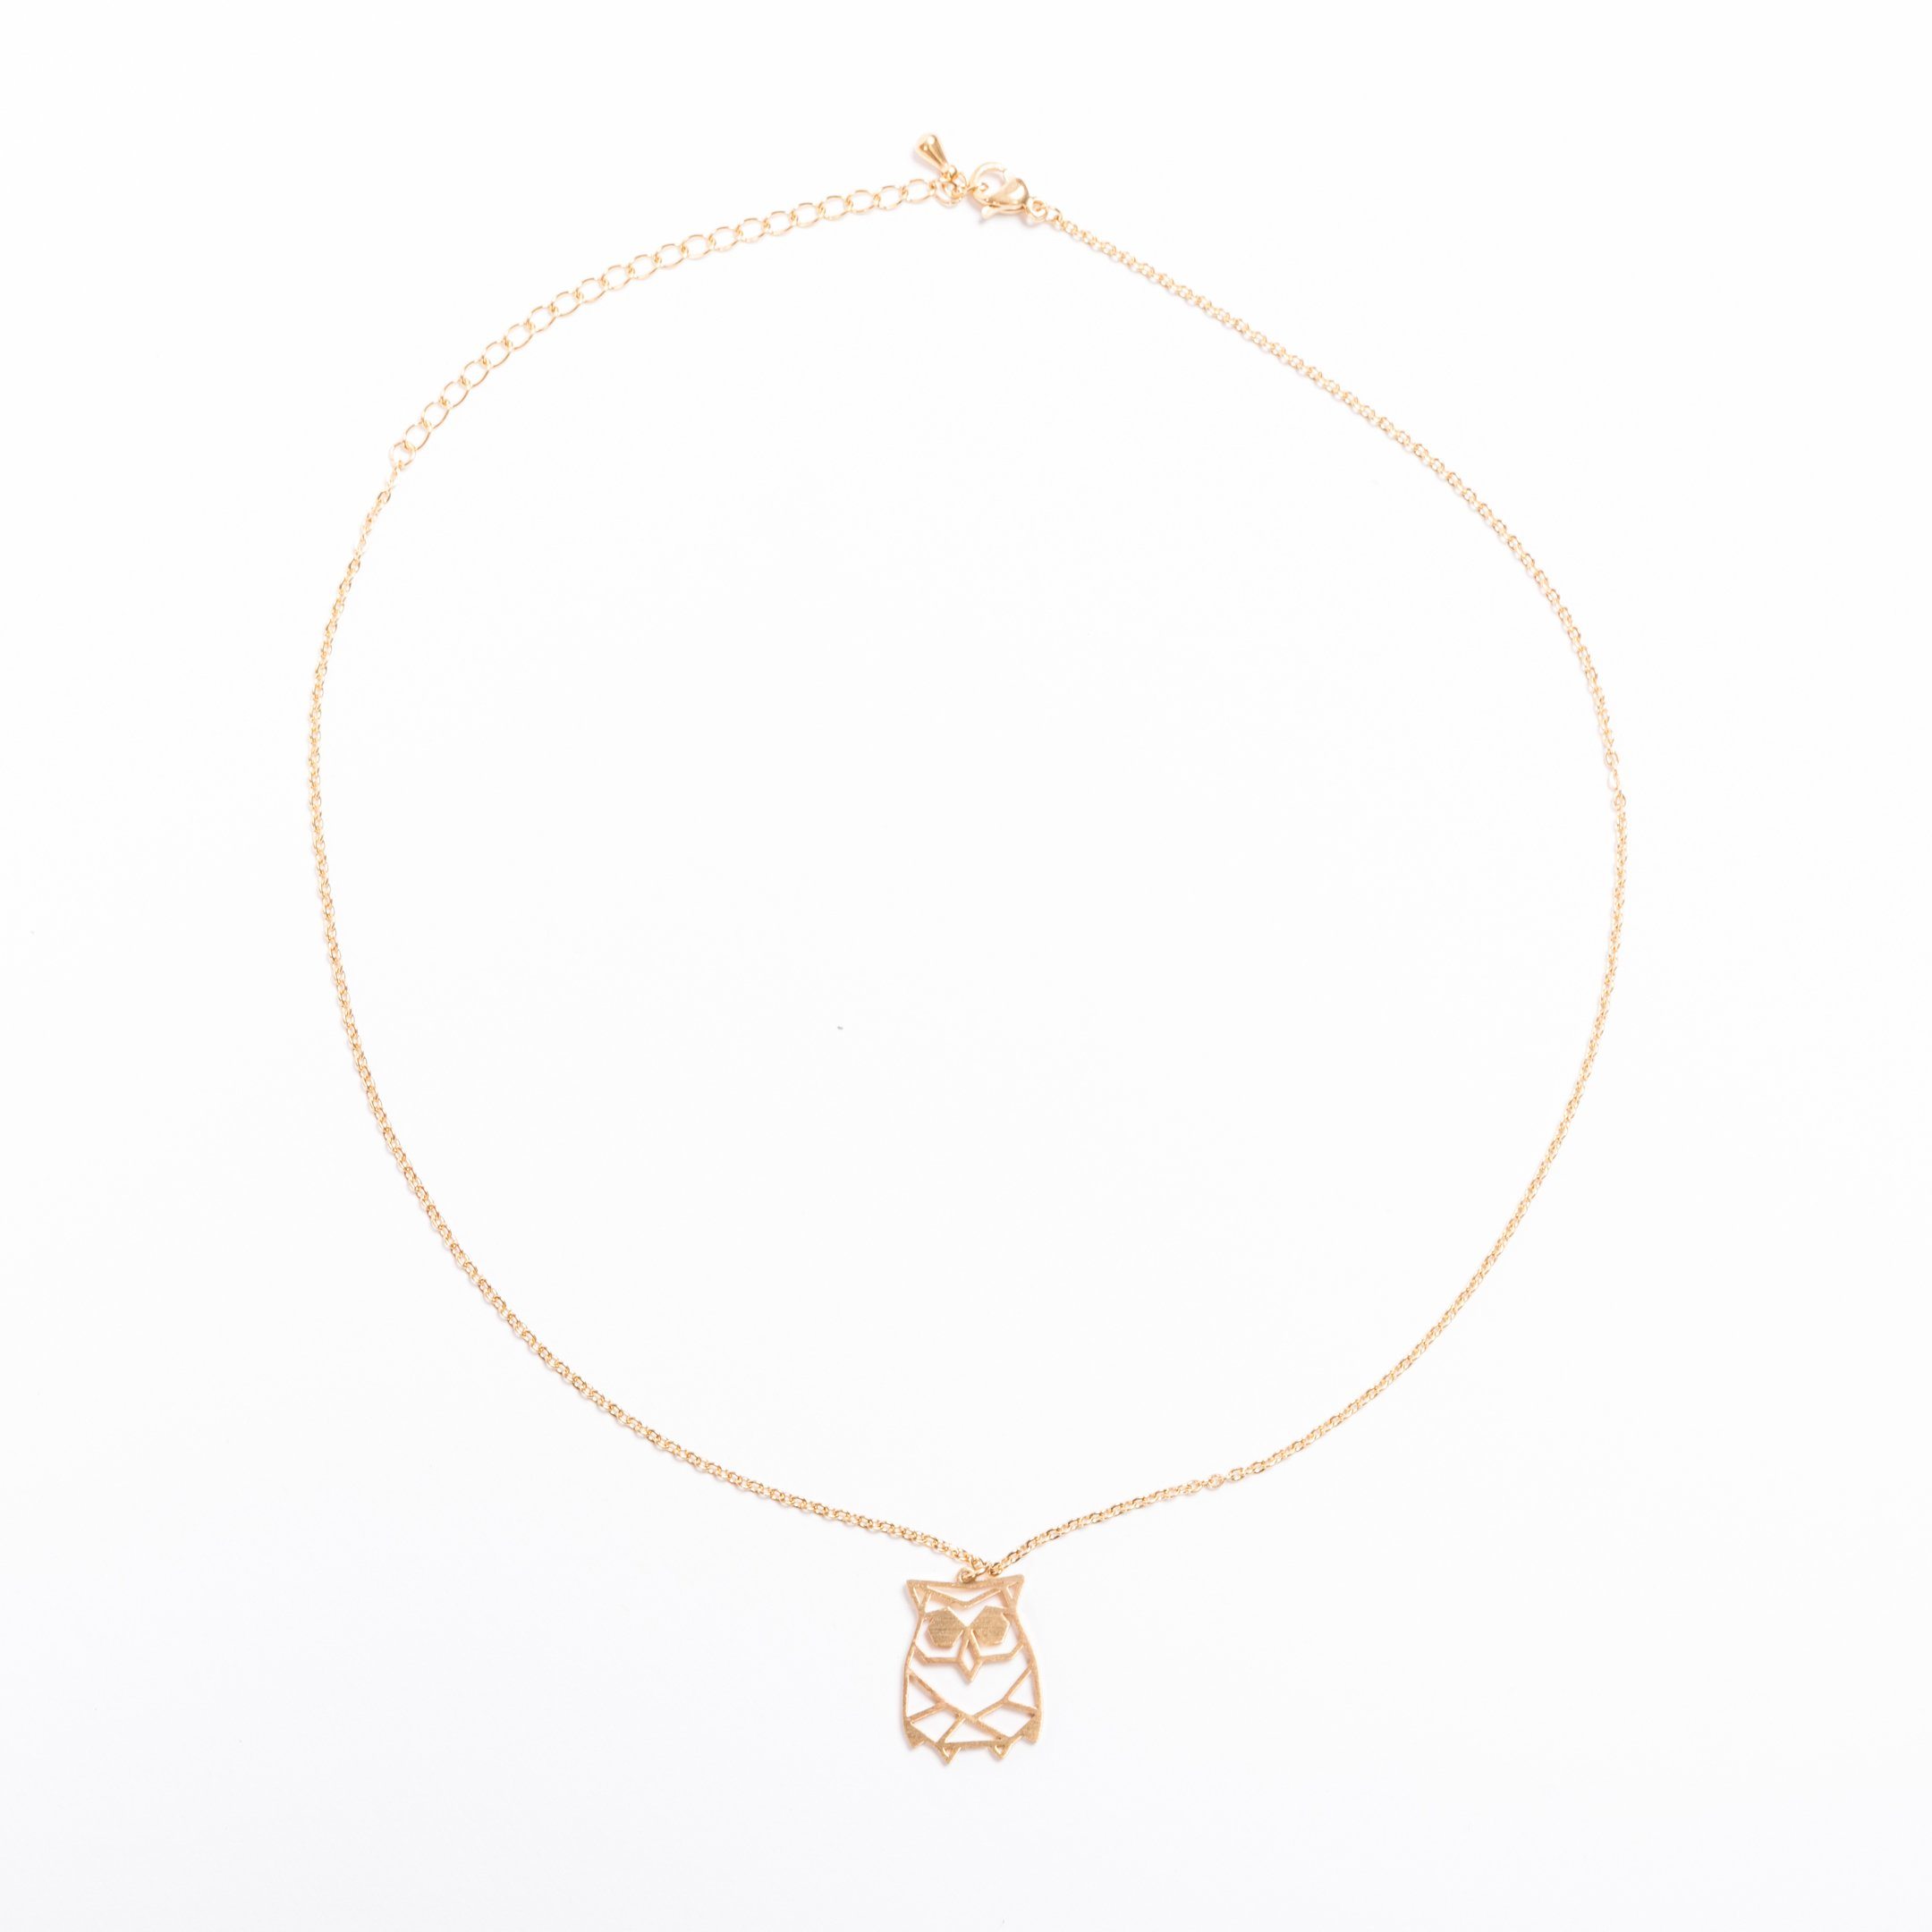 Owl Gold Origami Necklace